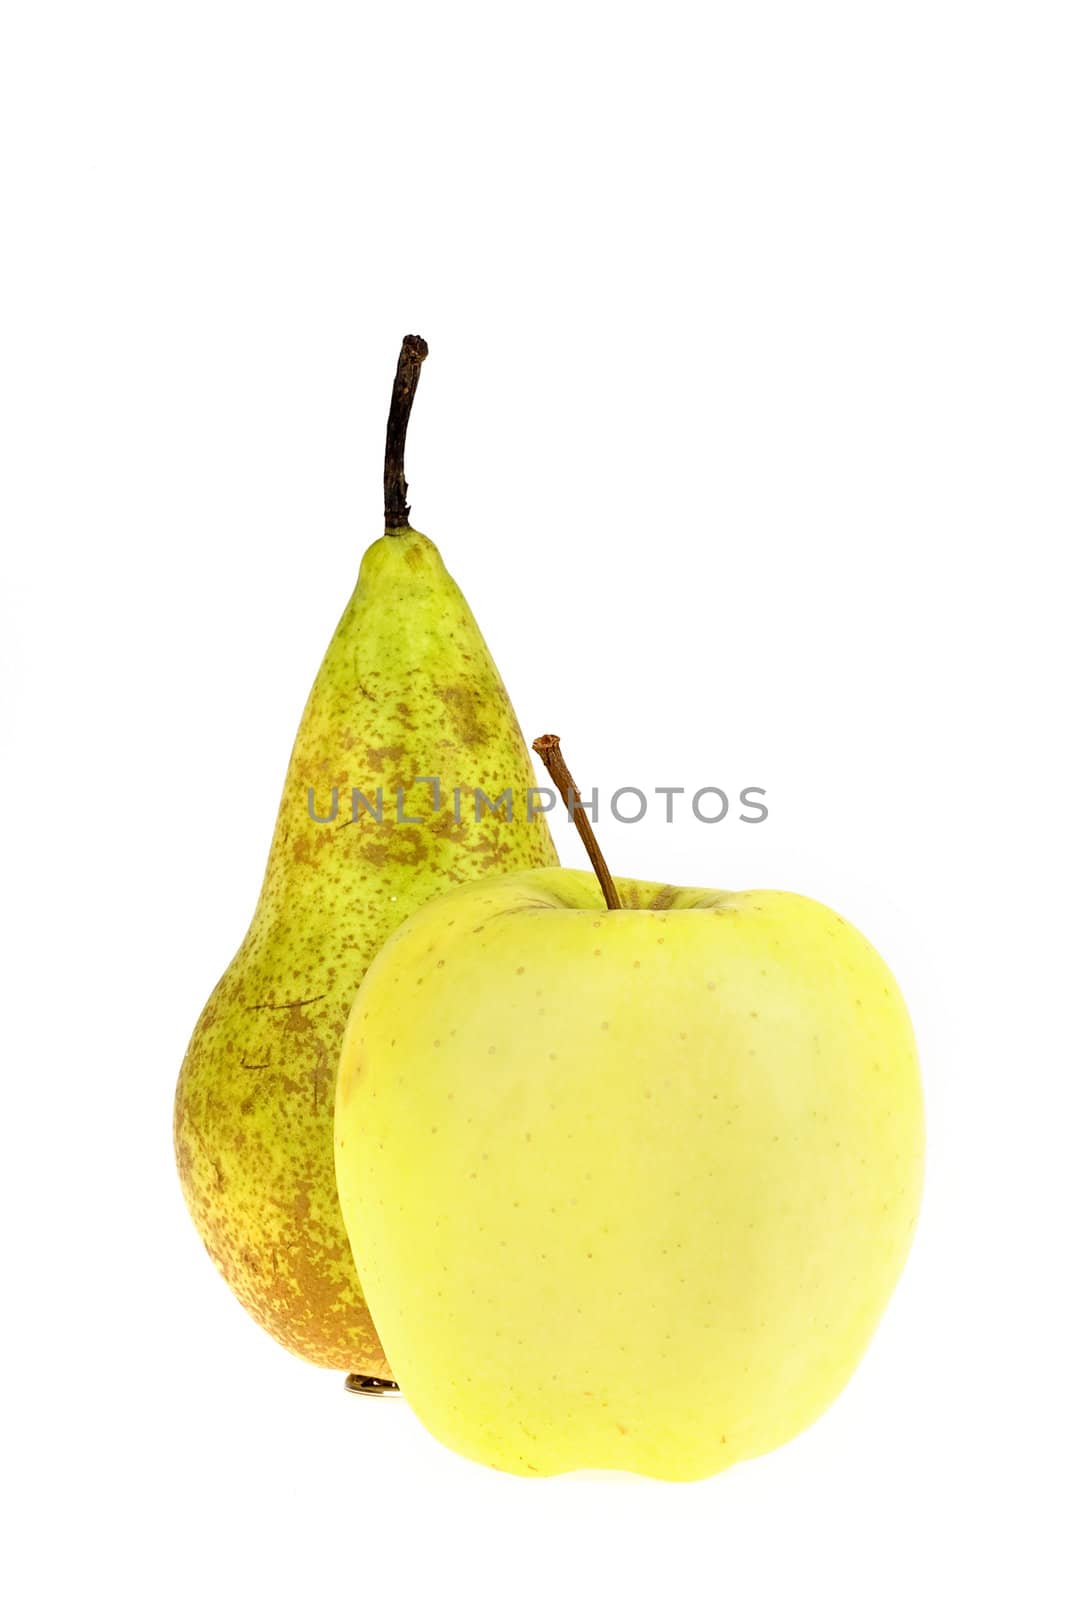 an apple and a pear on a white background